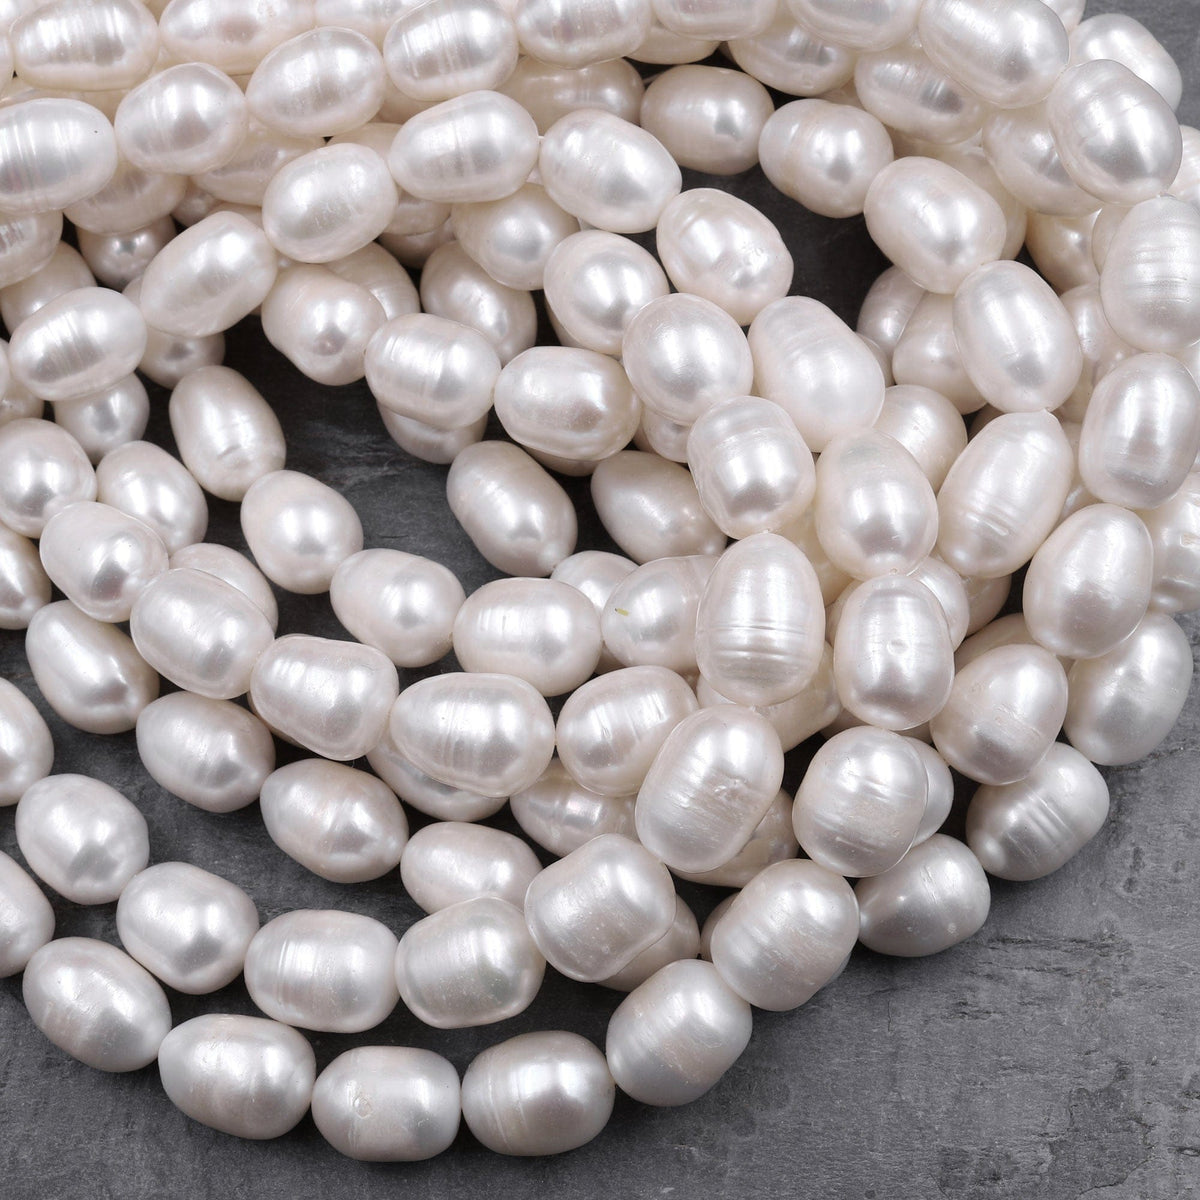 4-5mm White Small Pearl, Potato Freshwater Pearls, Fine Seed Pearl Beads,  Good Luster Oval Pearls, Cultured Pearl Beads String, FP250-XS 